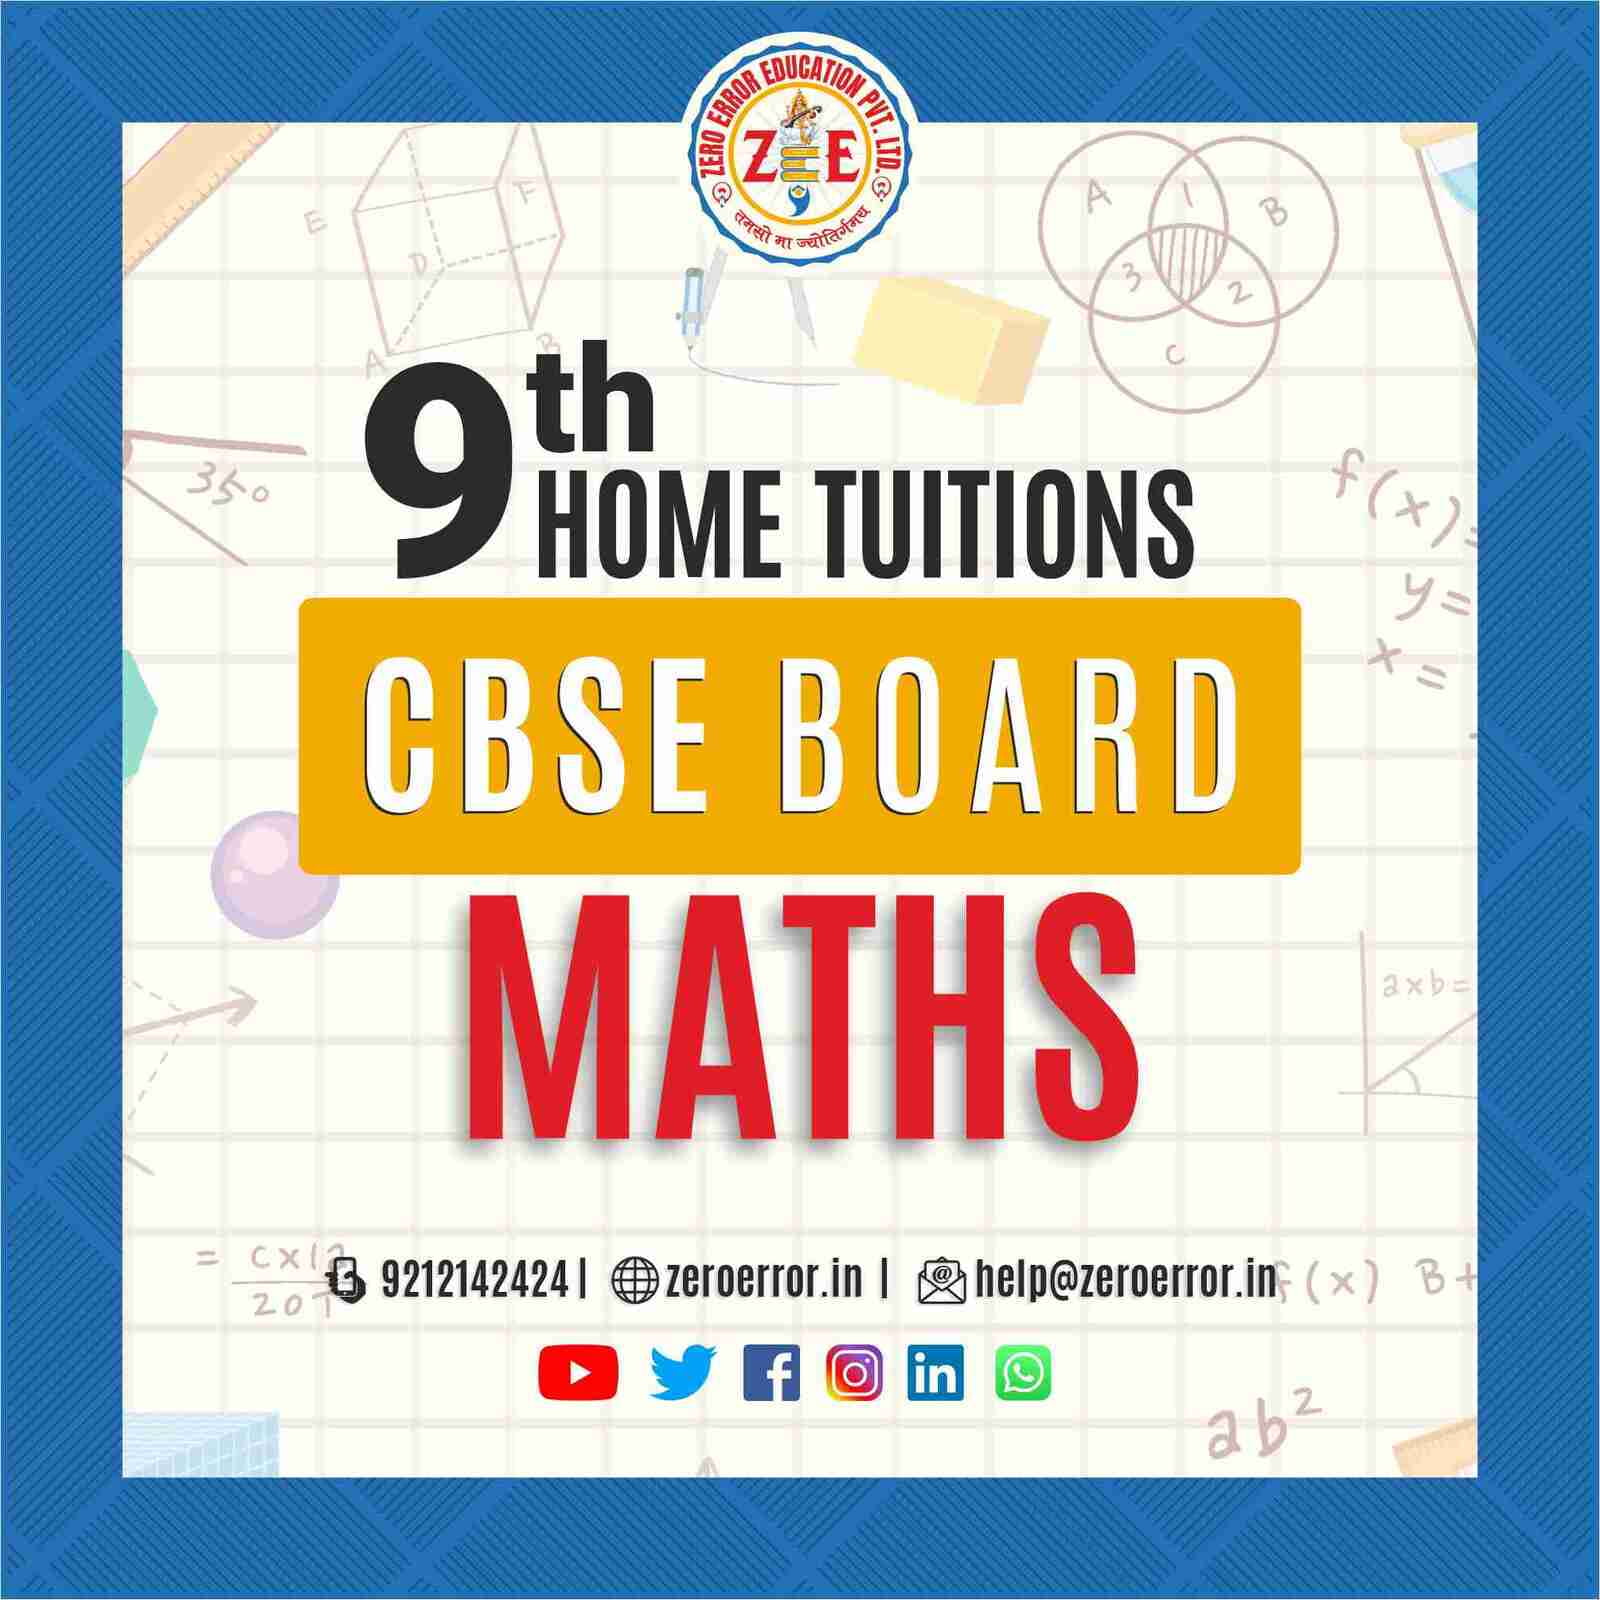 9th Grade CBSE Math's Online Classes by Zero Error Education Prepare for your CBSE board exams with online and offline Math's classes for 9th grade. Learn from experienced home tutors and get all the help you need to succeed. Enroll today at Zero Error Education. [https://zeroerror.in/] Call 9212142424 for more information.